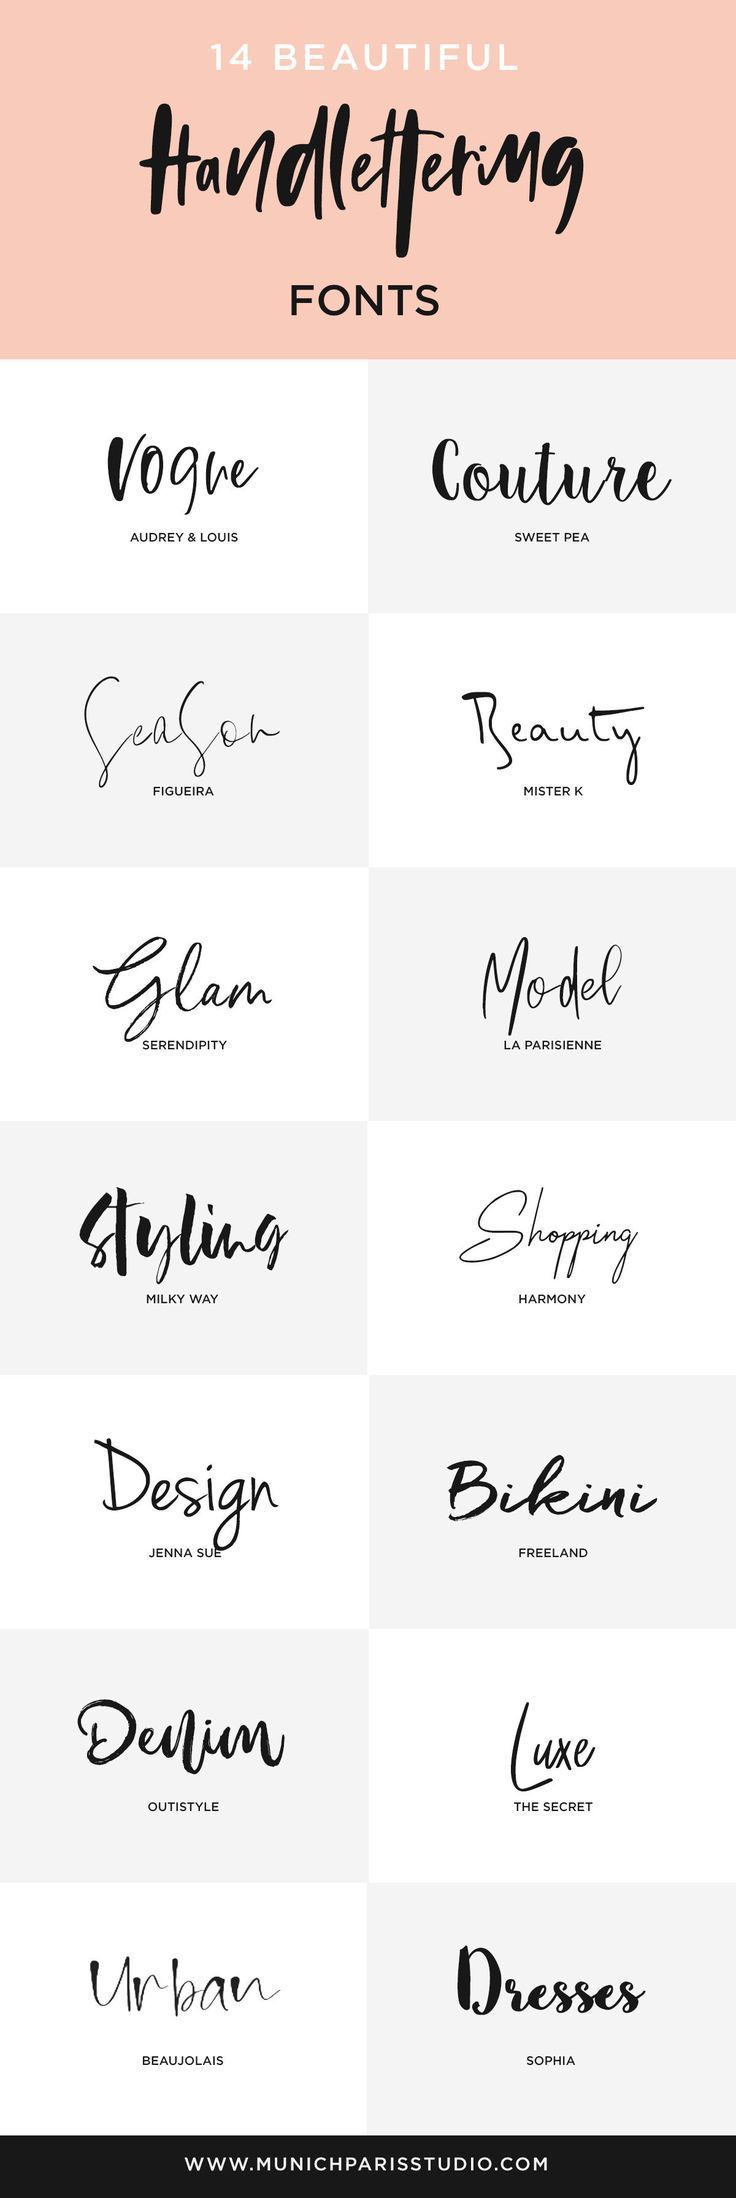 14 Beautiful Hand-Lettered Fonts for Logo & Branding | MunichParis Studio - 14 Beautiful Hand-Lettered Fonts for Logo & Branding | MunichParis Studio -   16 beauty Logo fonts ideas